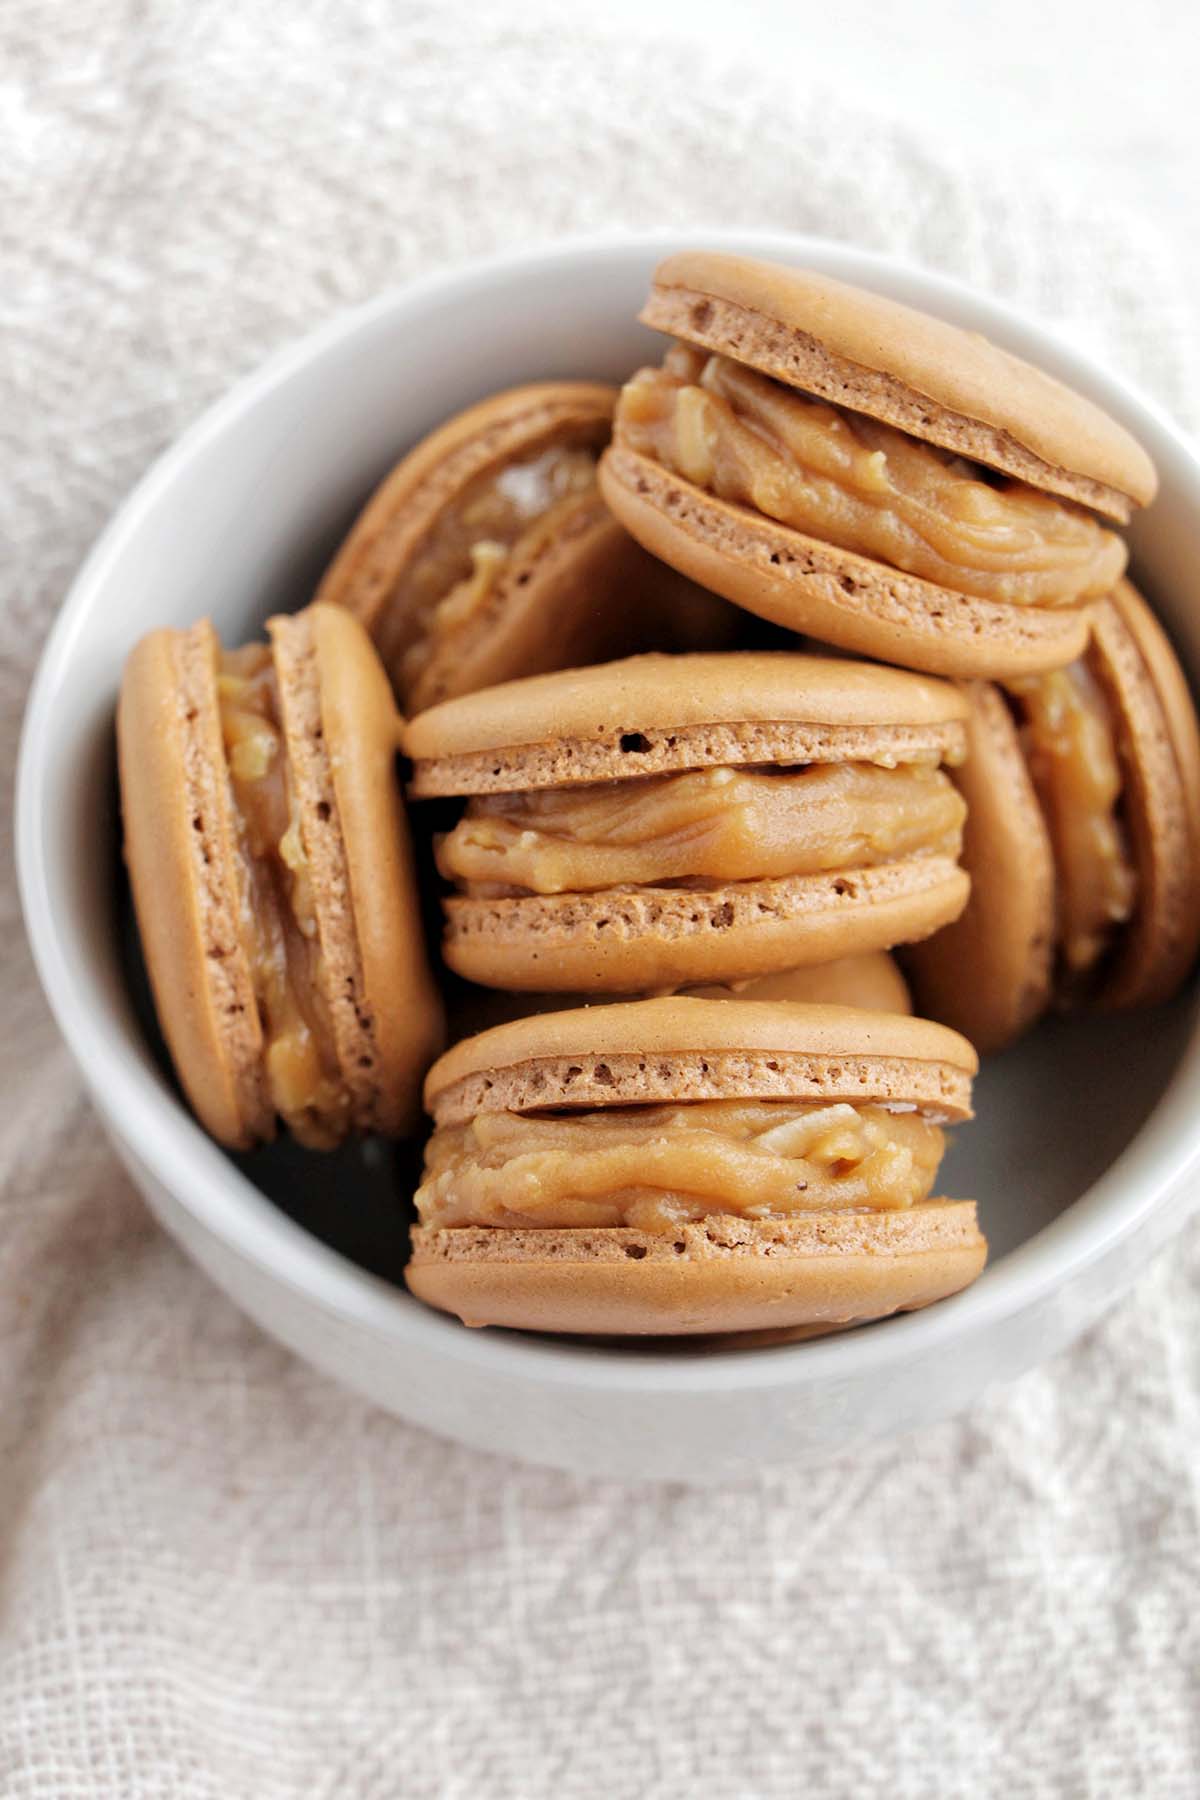 tan macarons filled with coconut caramel.